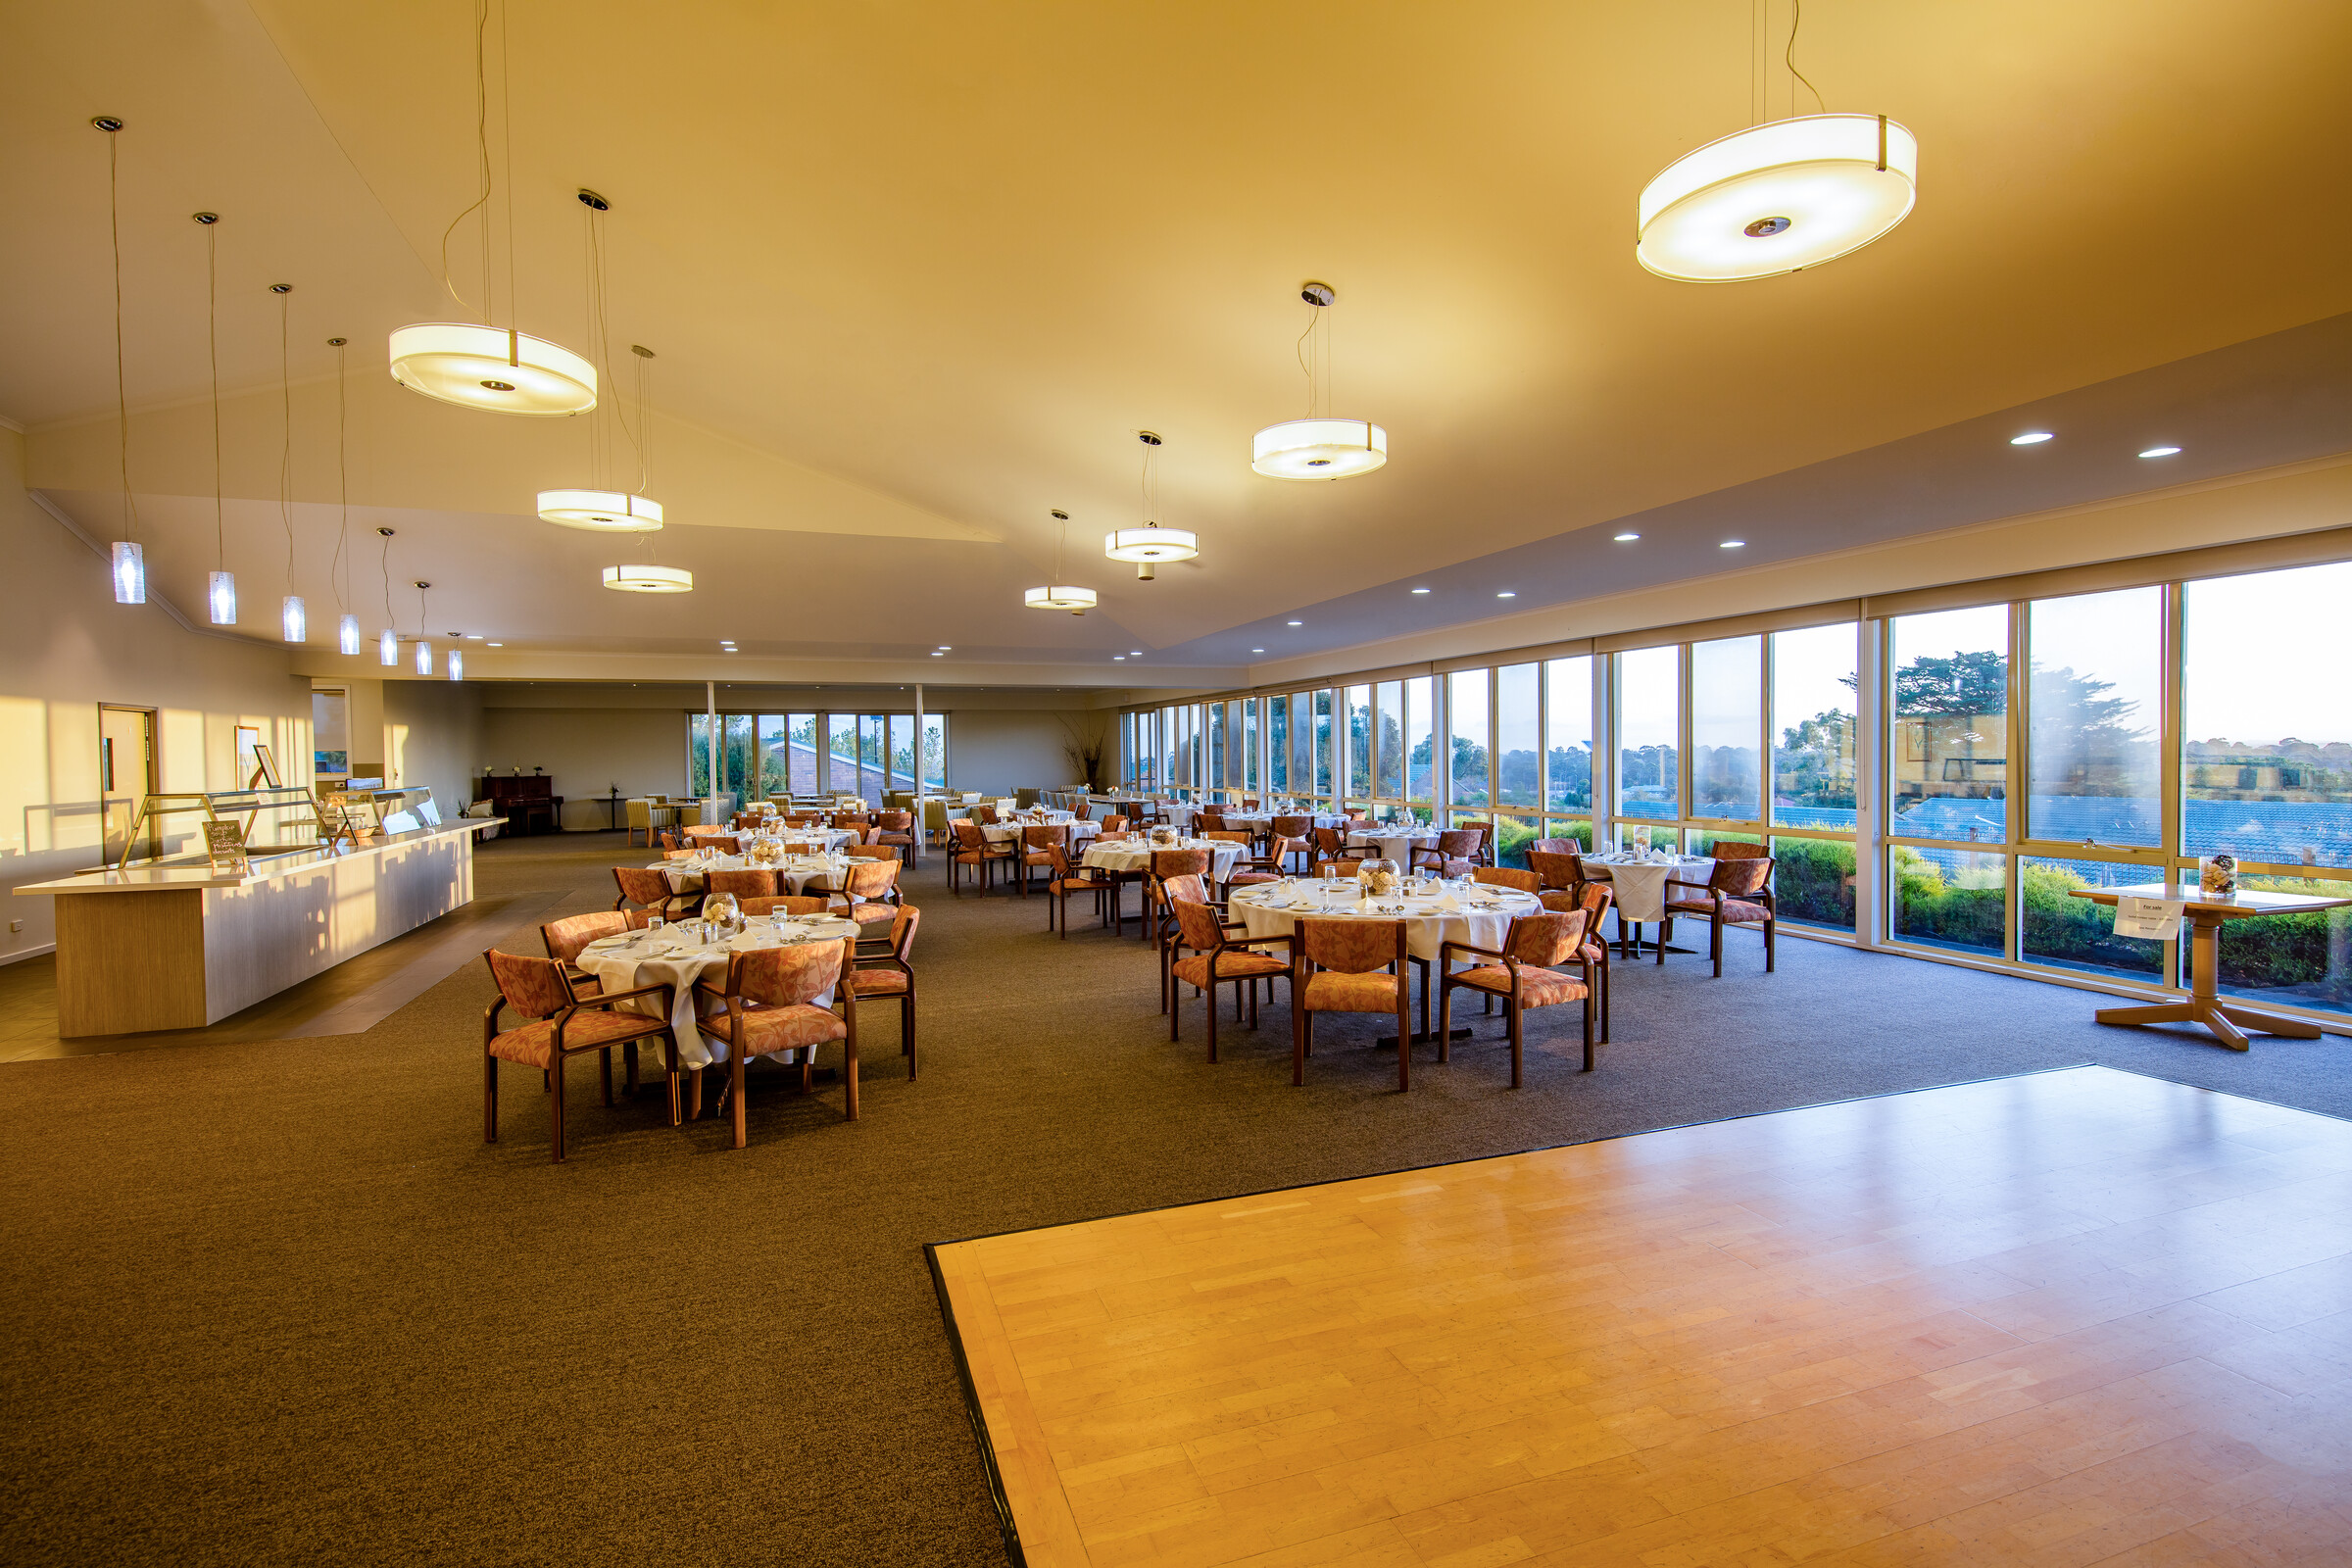 Meadowvale Village large dining room and restaurant area with dance floor